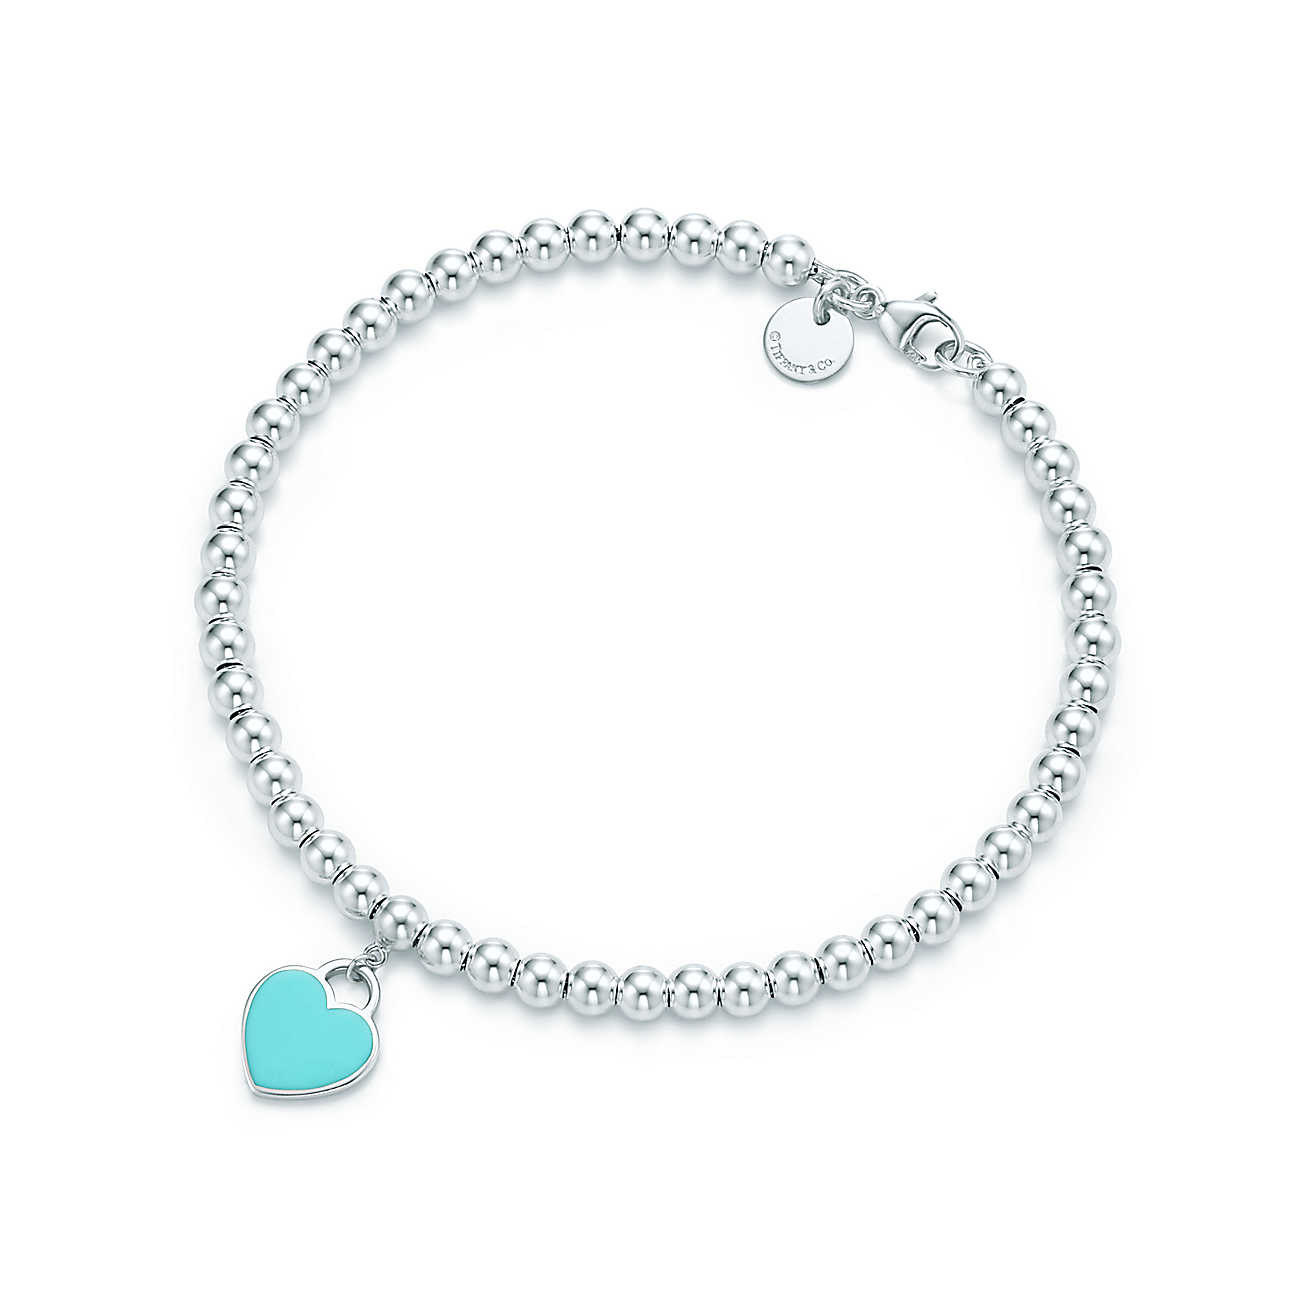 Tiffany And Co Heart Bracelet
 Return to Tiffany™ mini heart tag in sterling silver on a